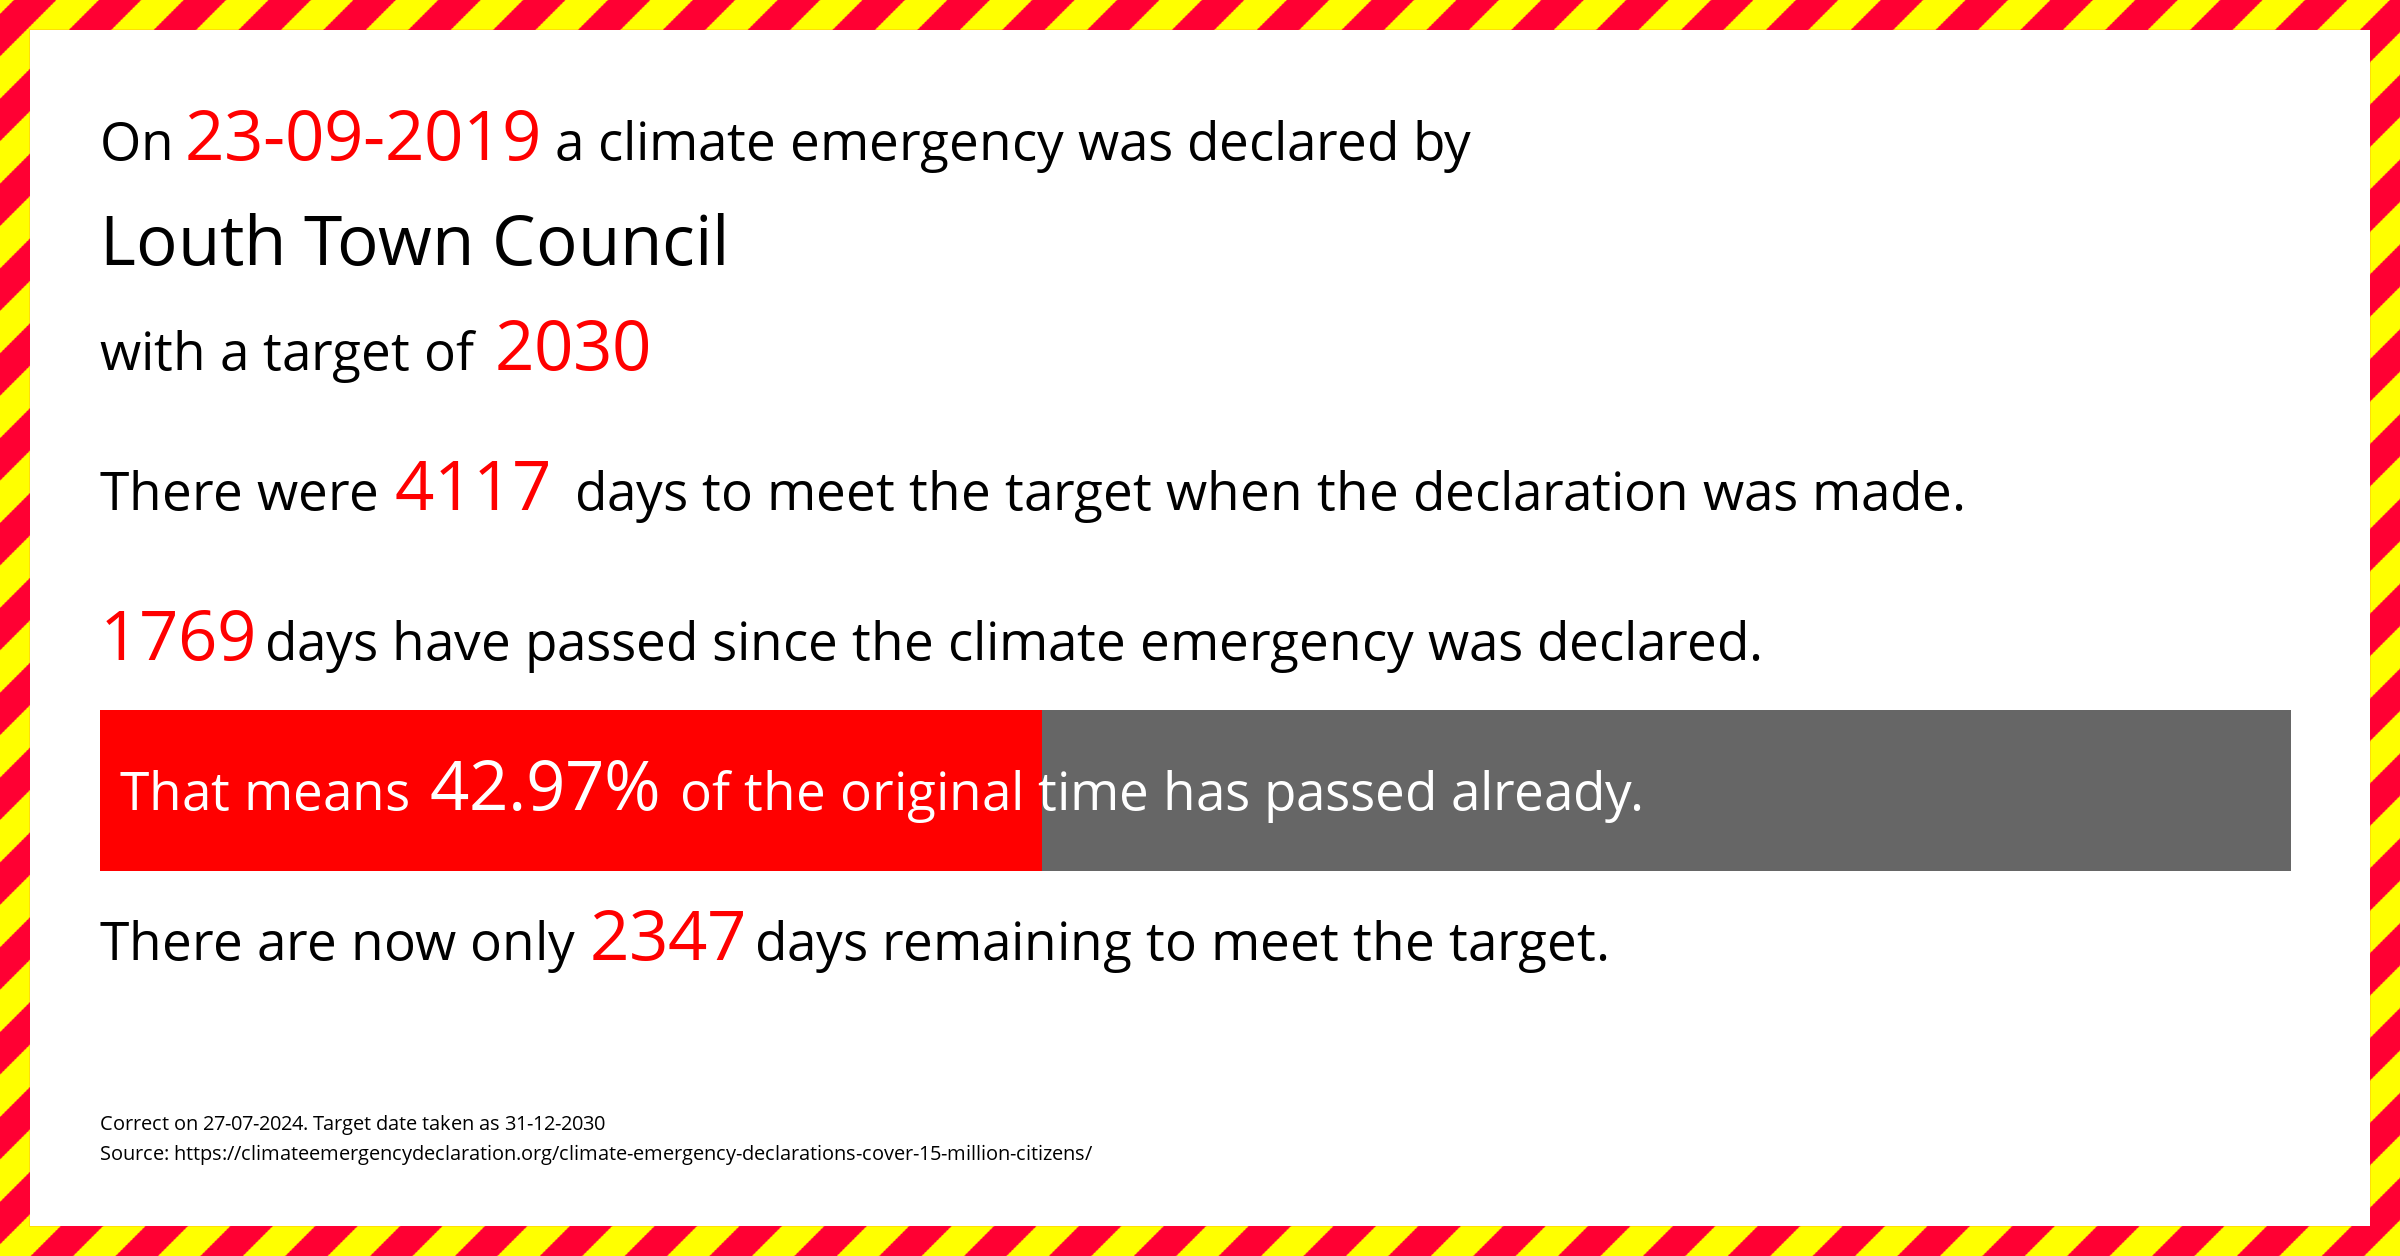 Louth Town Council declared a Climate emergency on Monday 23rd September 2019, with a target of 2030.